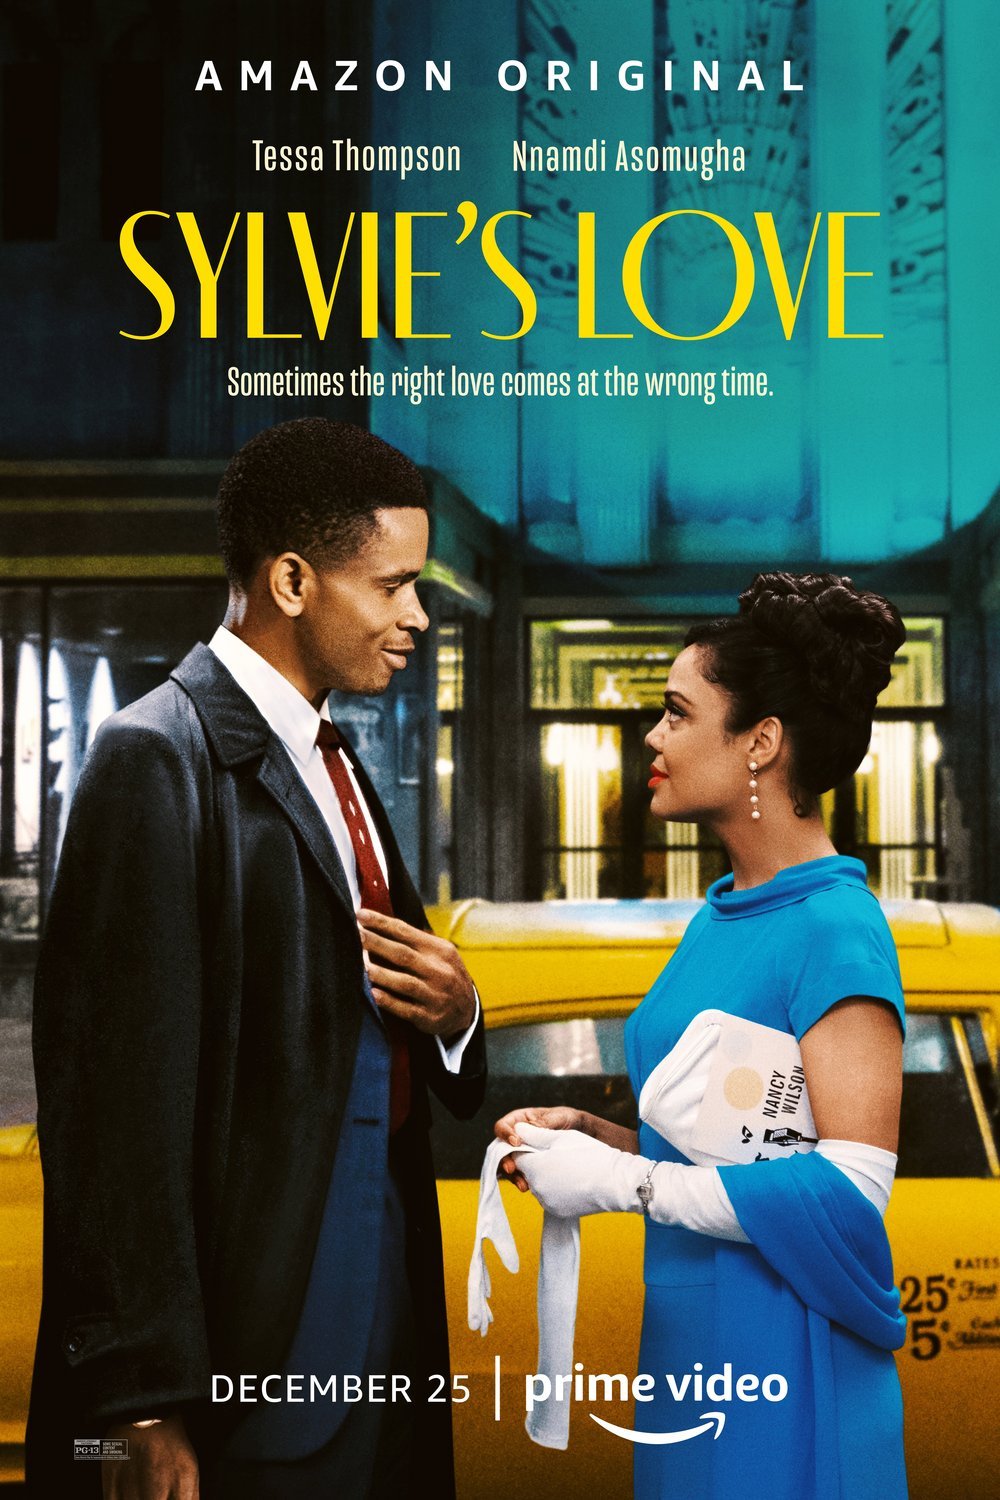 Poster of the movie Sylvie